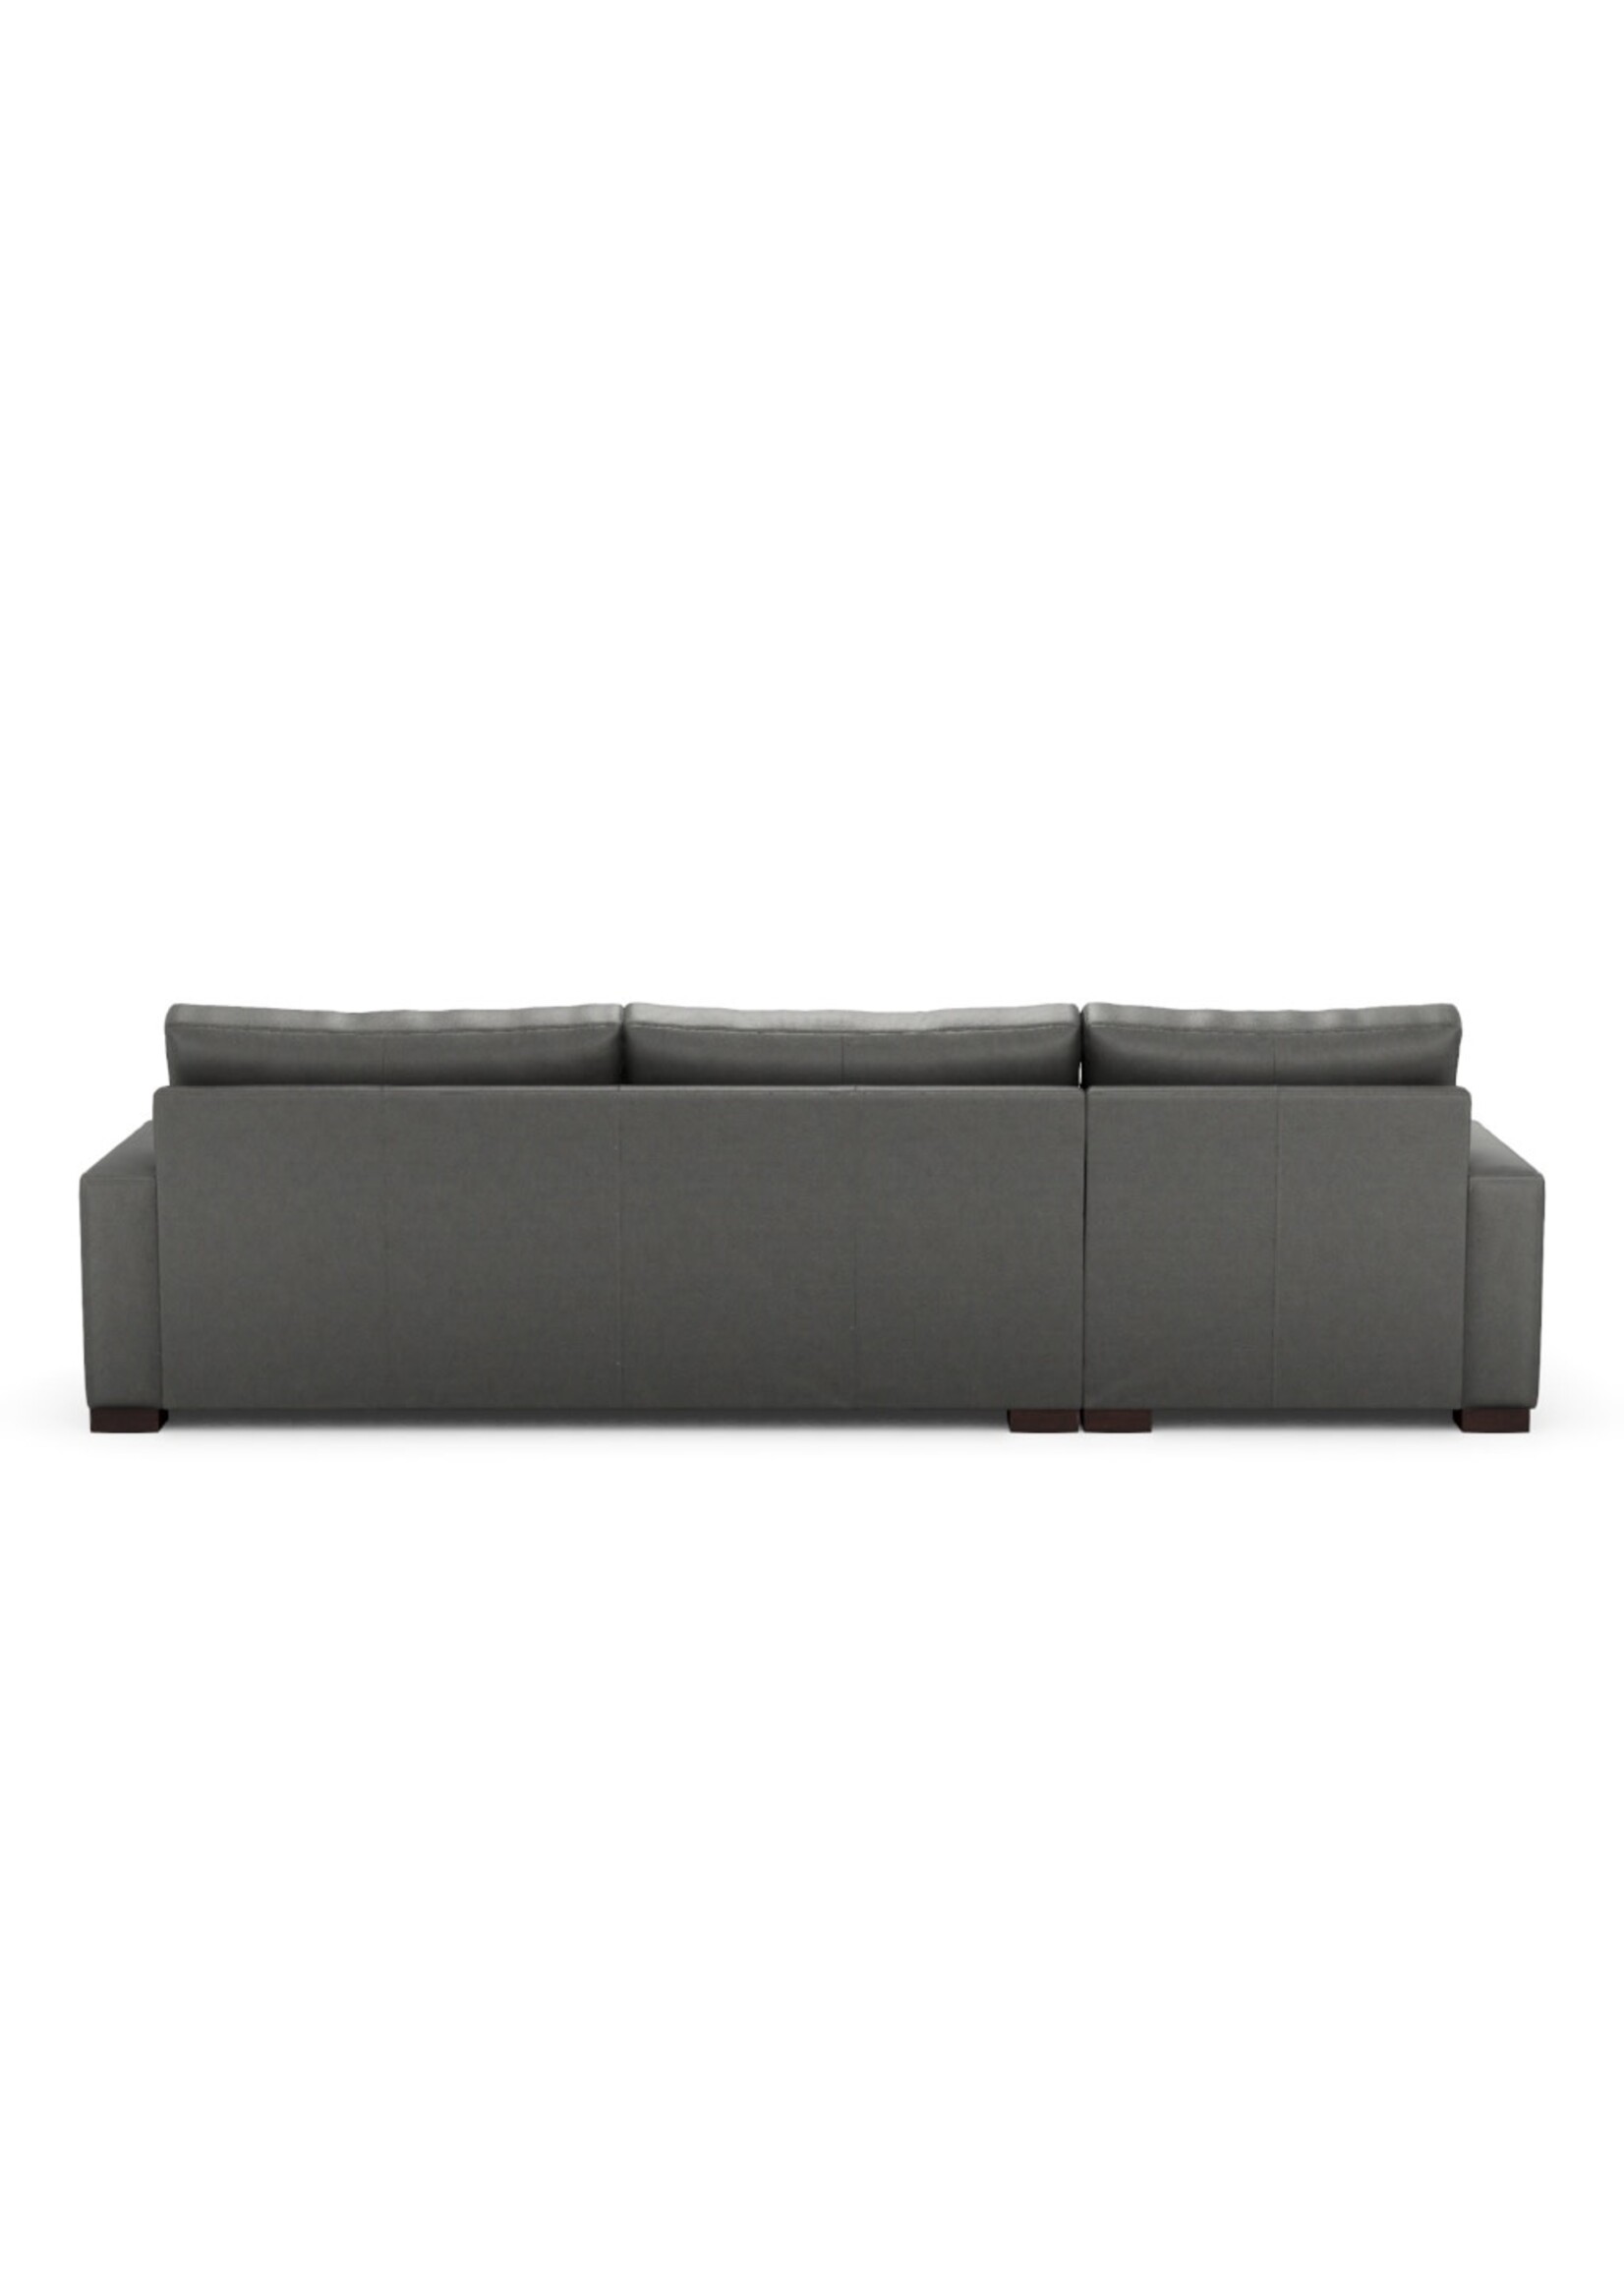 Rivera Sofa w/ LA Facing Chaise-Track Arm-Landscape Frozen Valley Only 1 in stock 117" x 67" Chaise